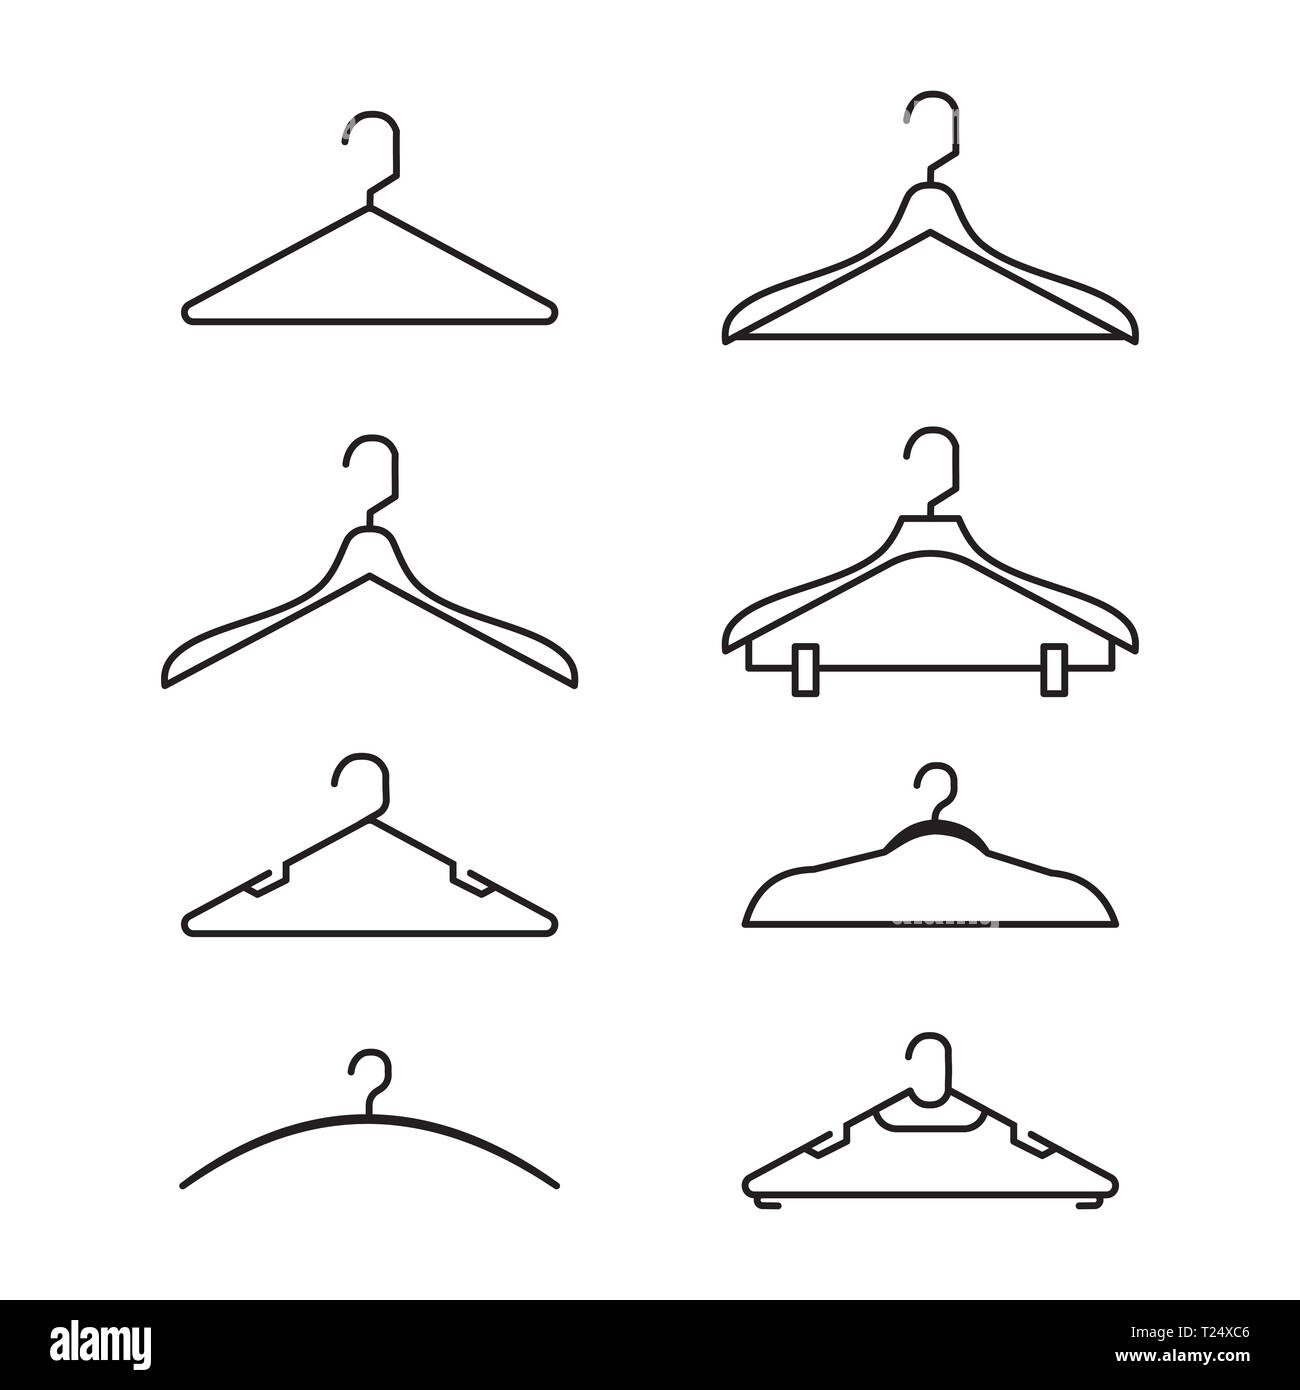 set of vector illustration hanger for clothing and fashion silhouette flat design style Stock Photo